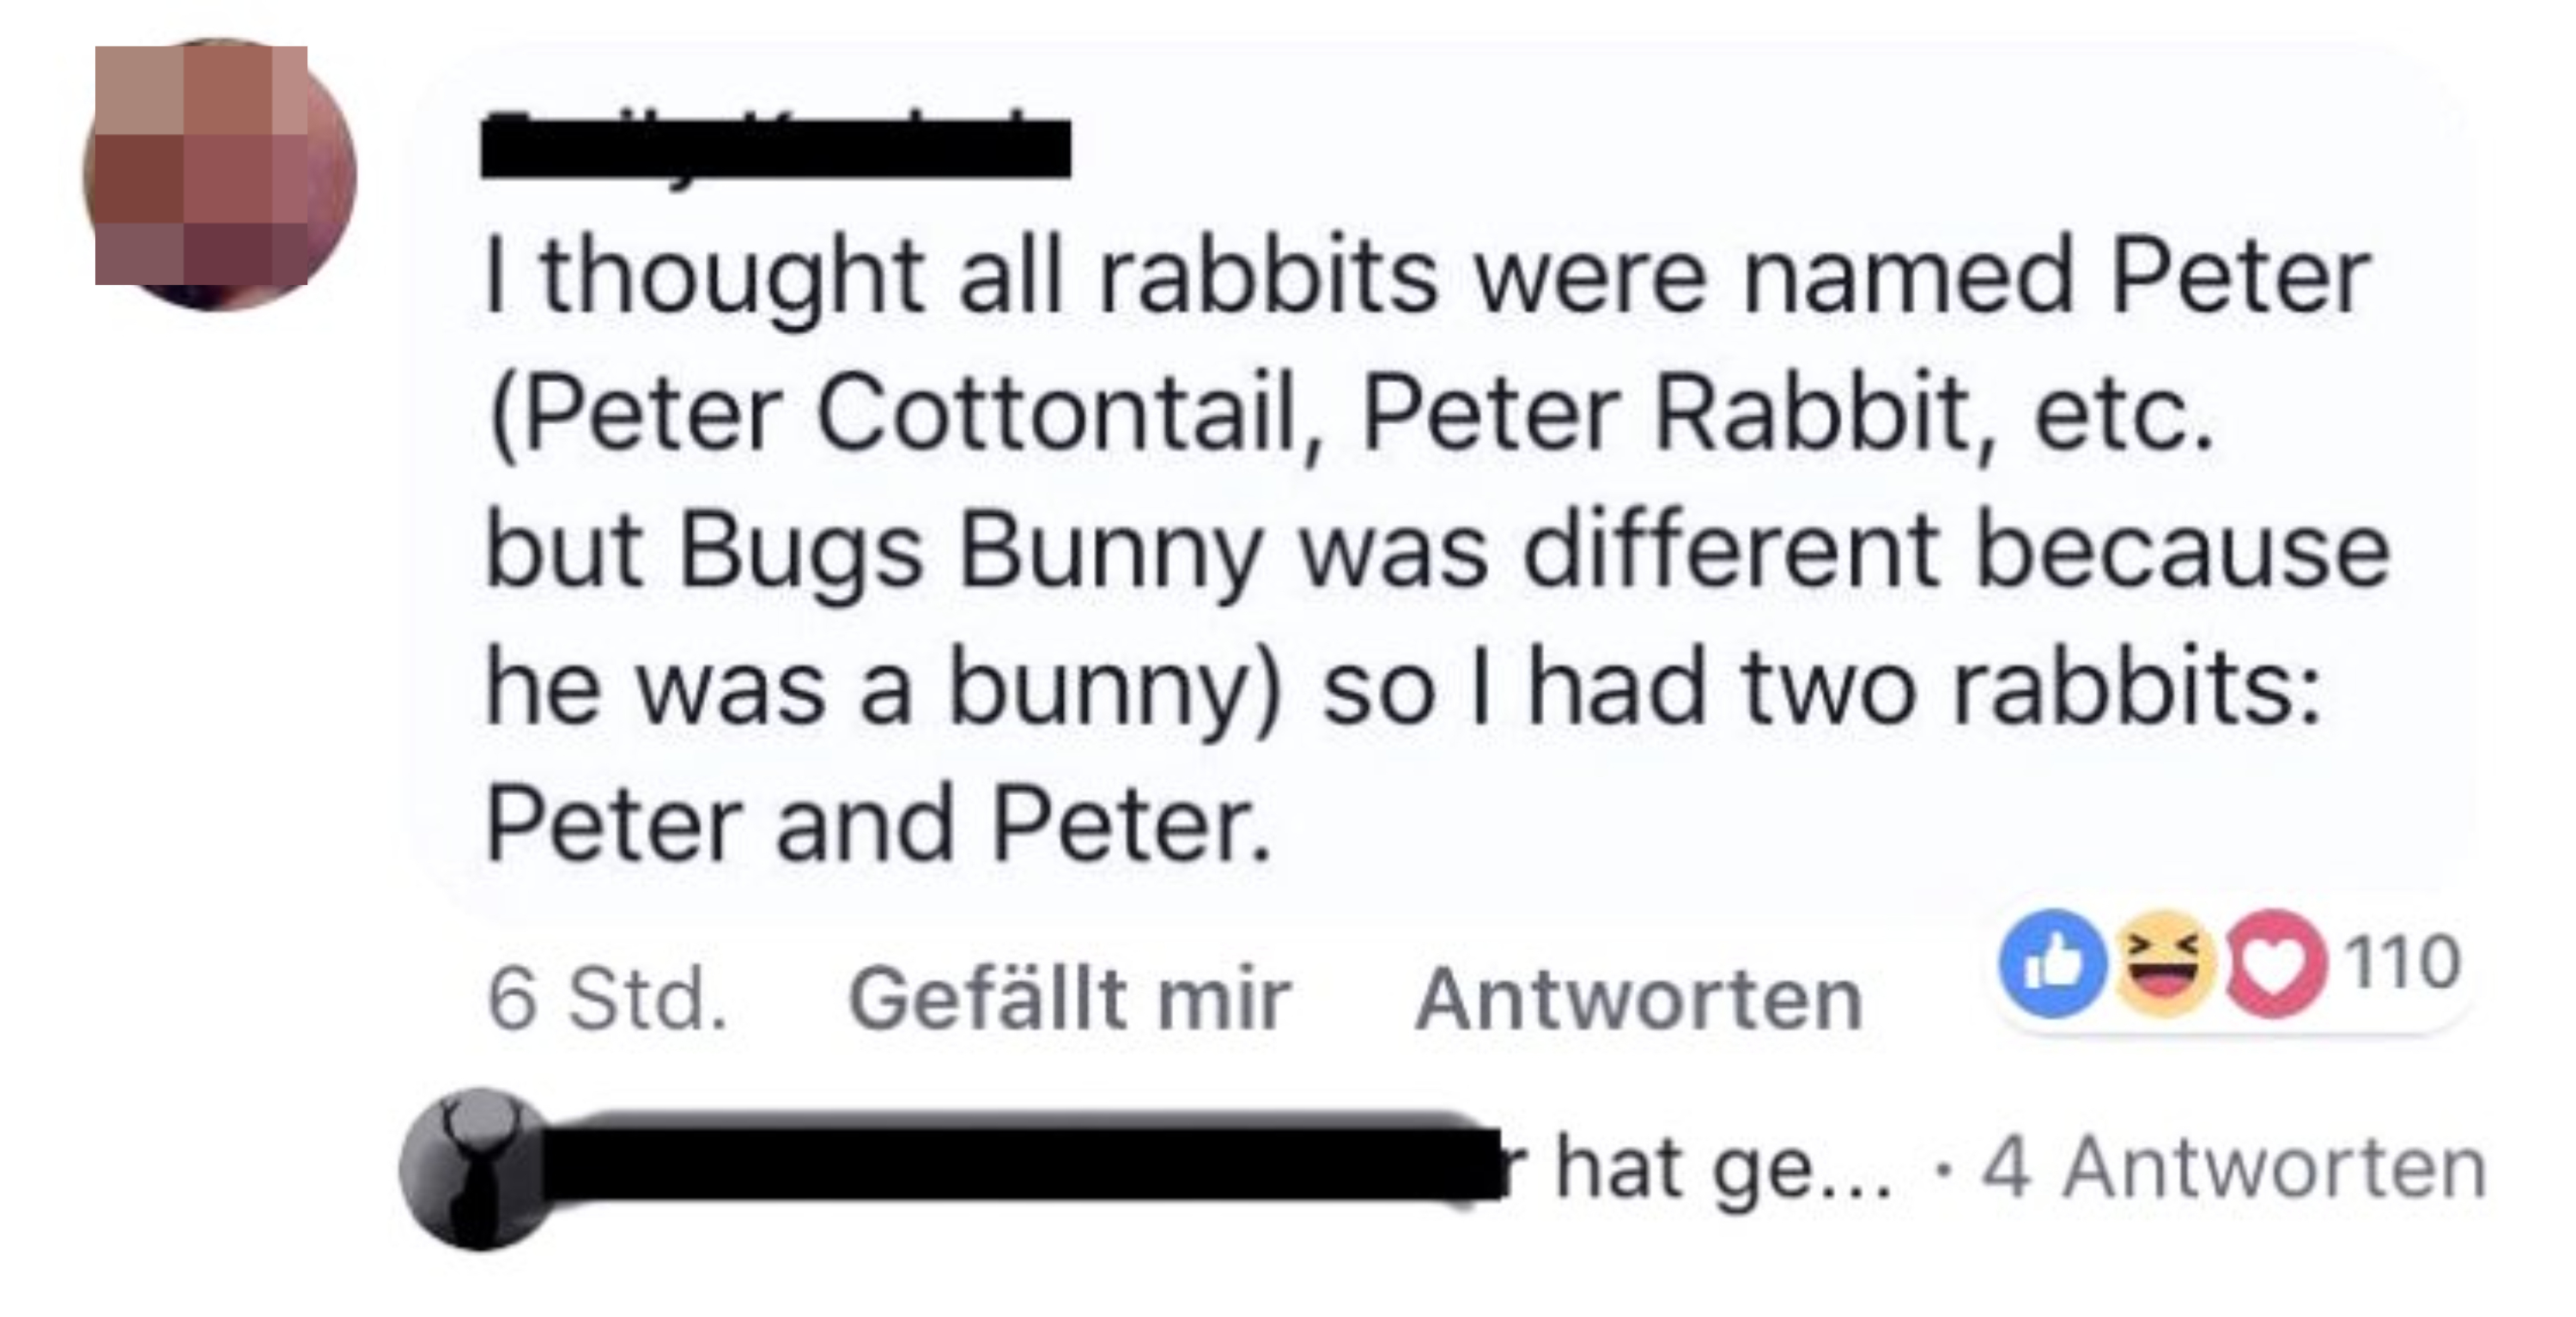 &quot;i thought all rabbits were named Peter (Peter Cottontail, Peter Rabbit, etc, but Bugs Bunny was different because he was a bunny) so I had two rabbits, Peter and Peter&quot;